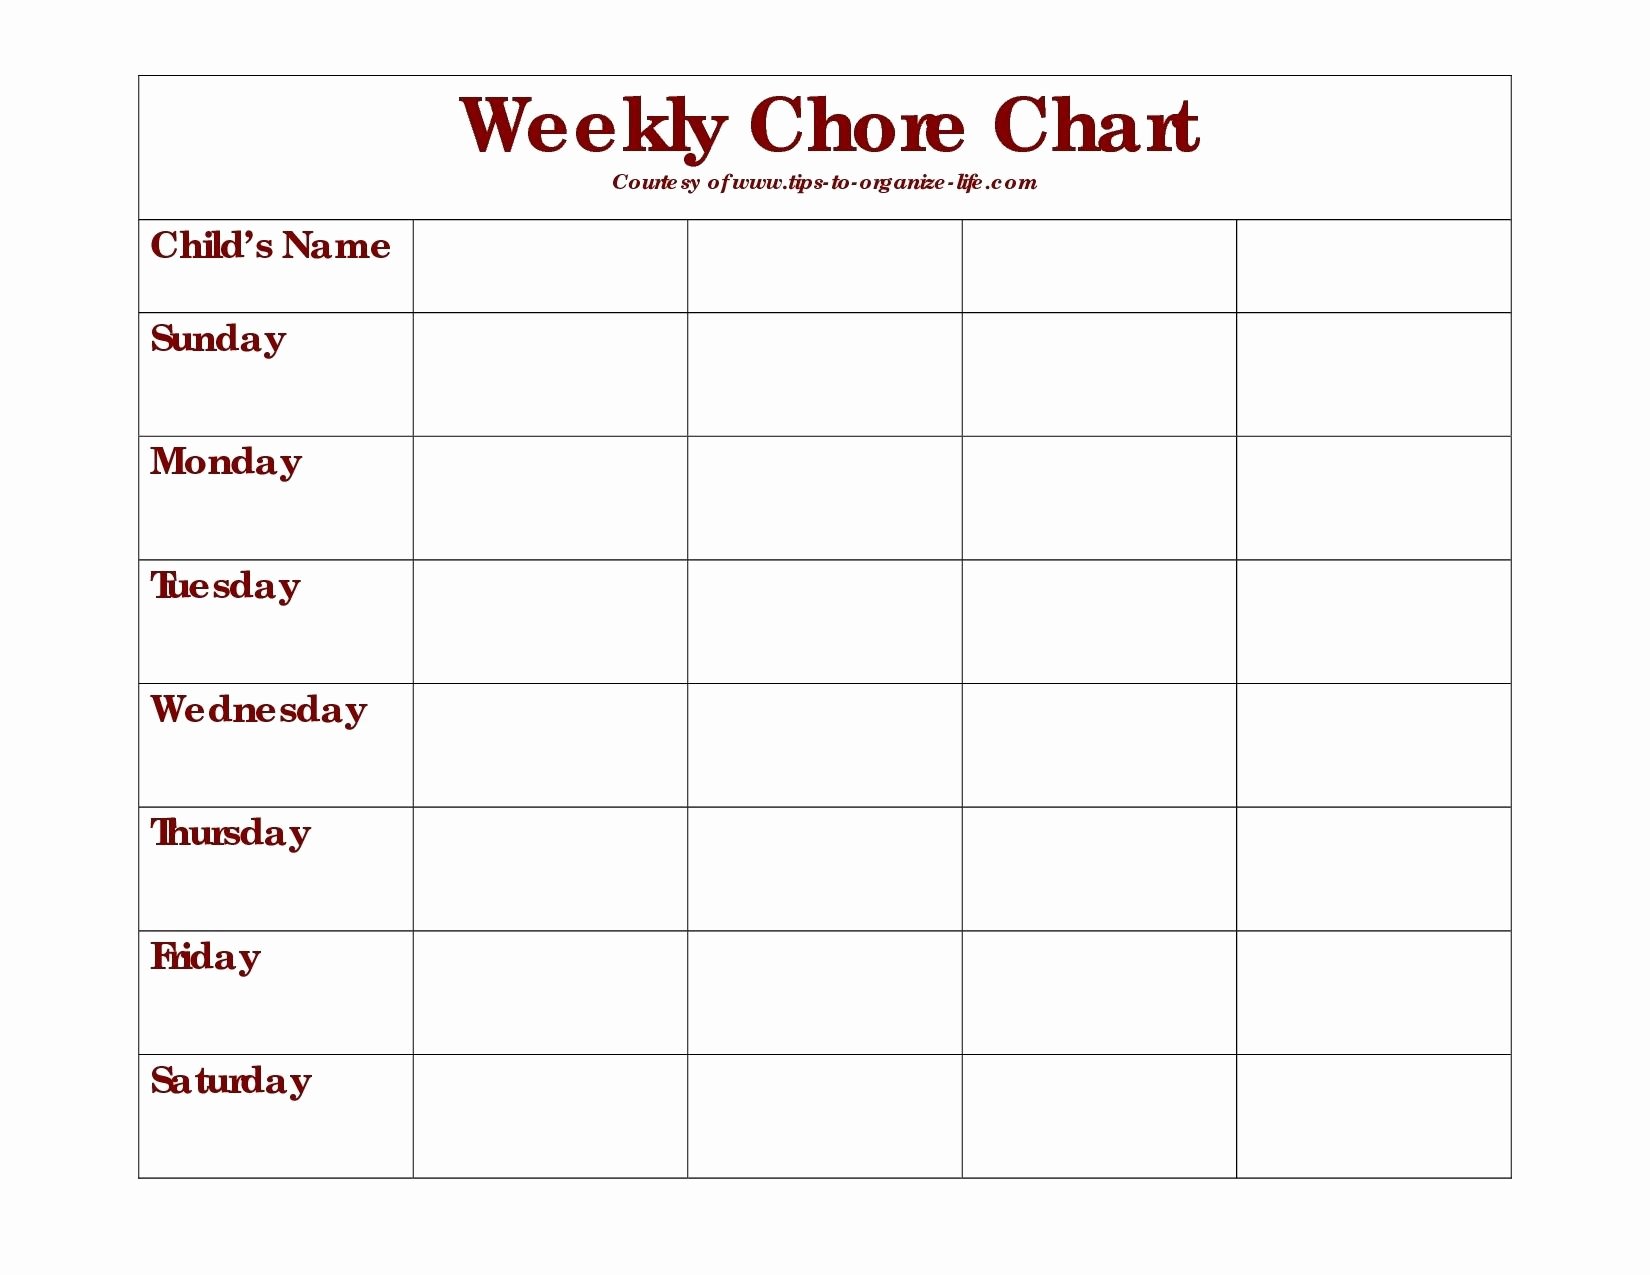 Weekly Chore Chart Template Awesome Daily Chore Chart Printable Ibovnathandedecker within